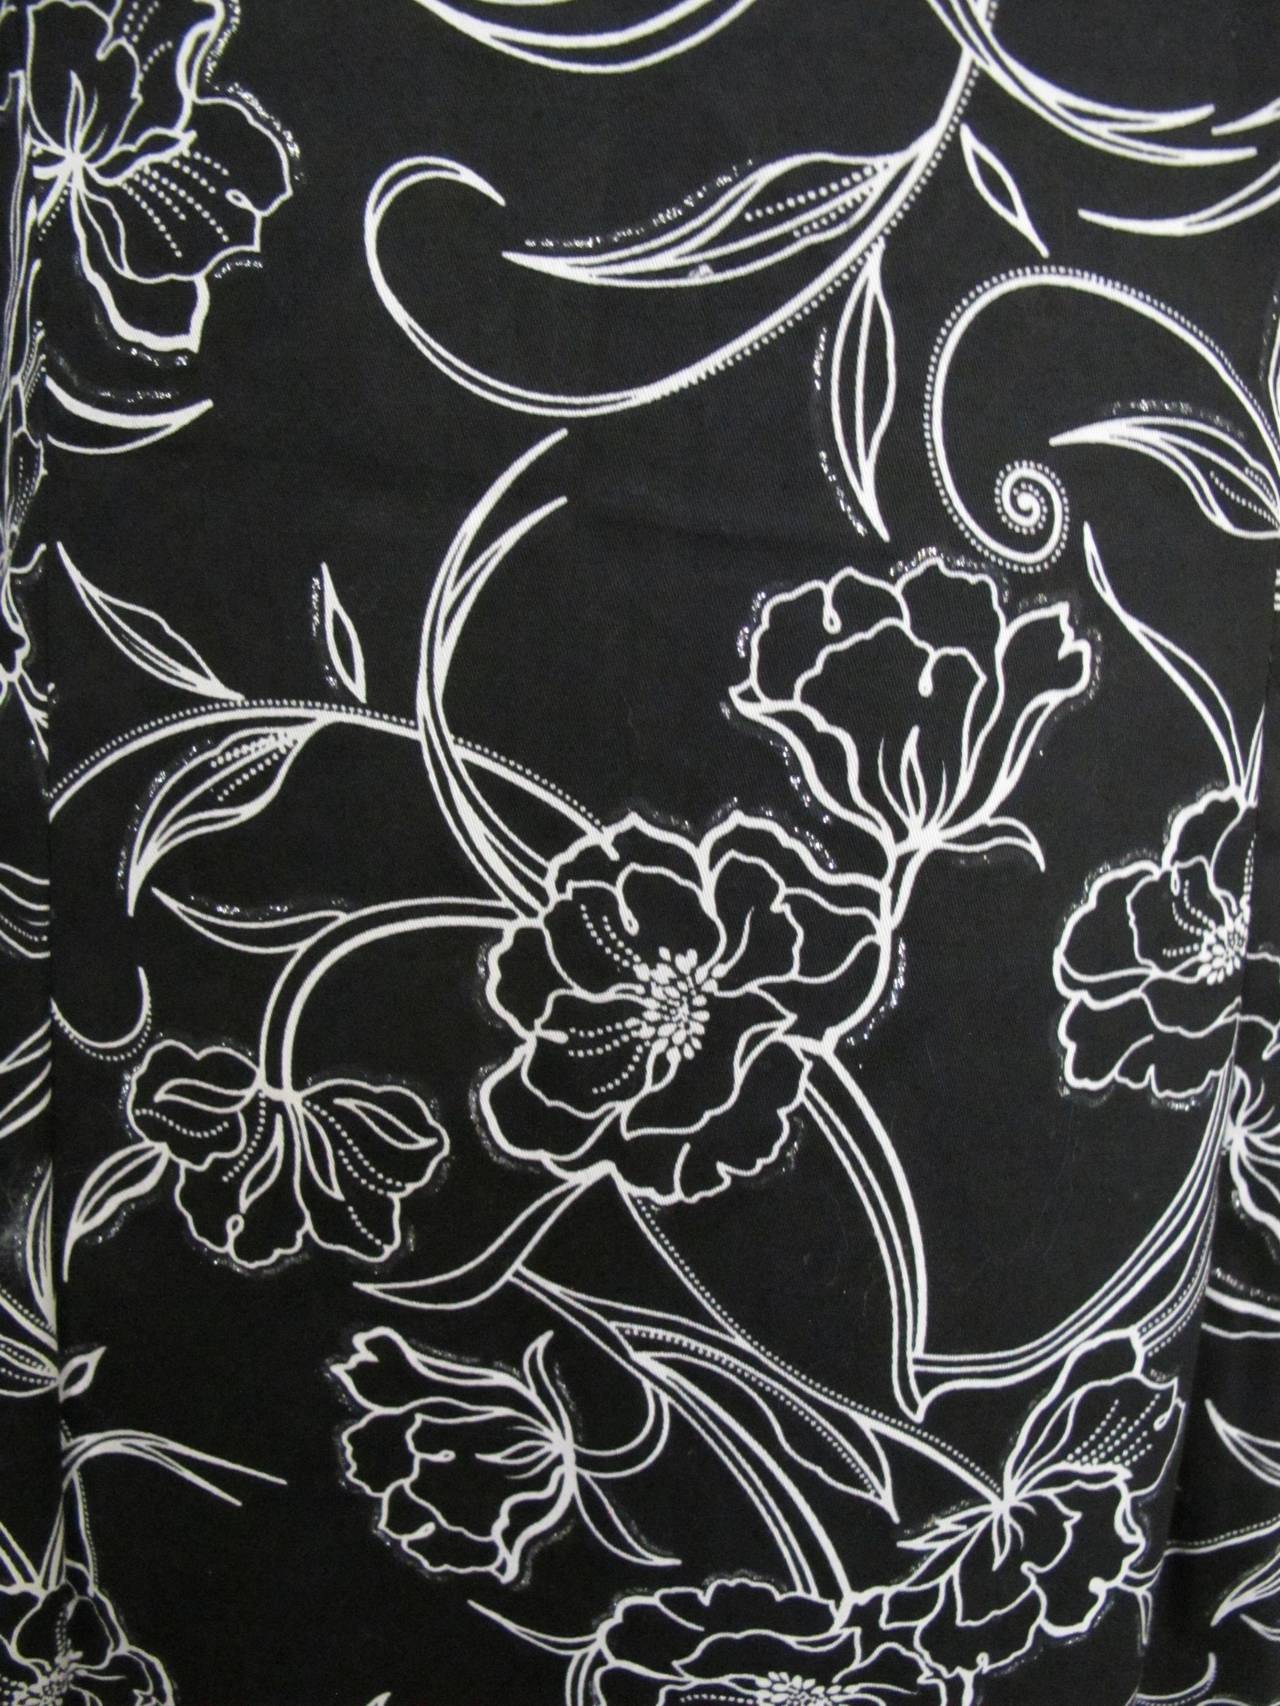 Qipao Black Silk Cotton Dress with White Flower Design and Silver Decents For Sale 4